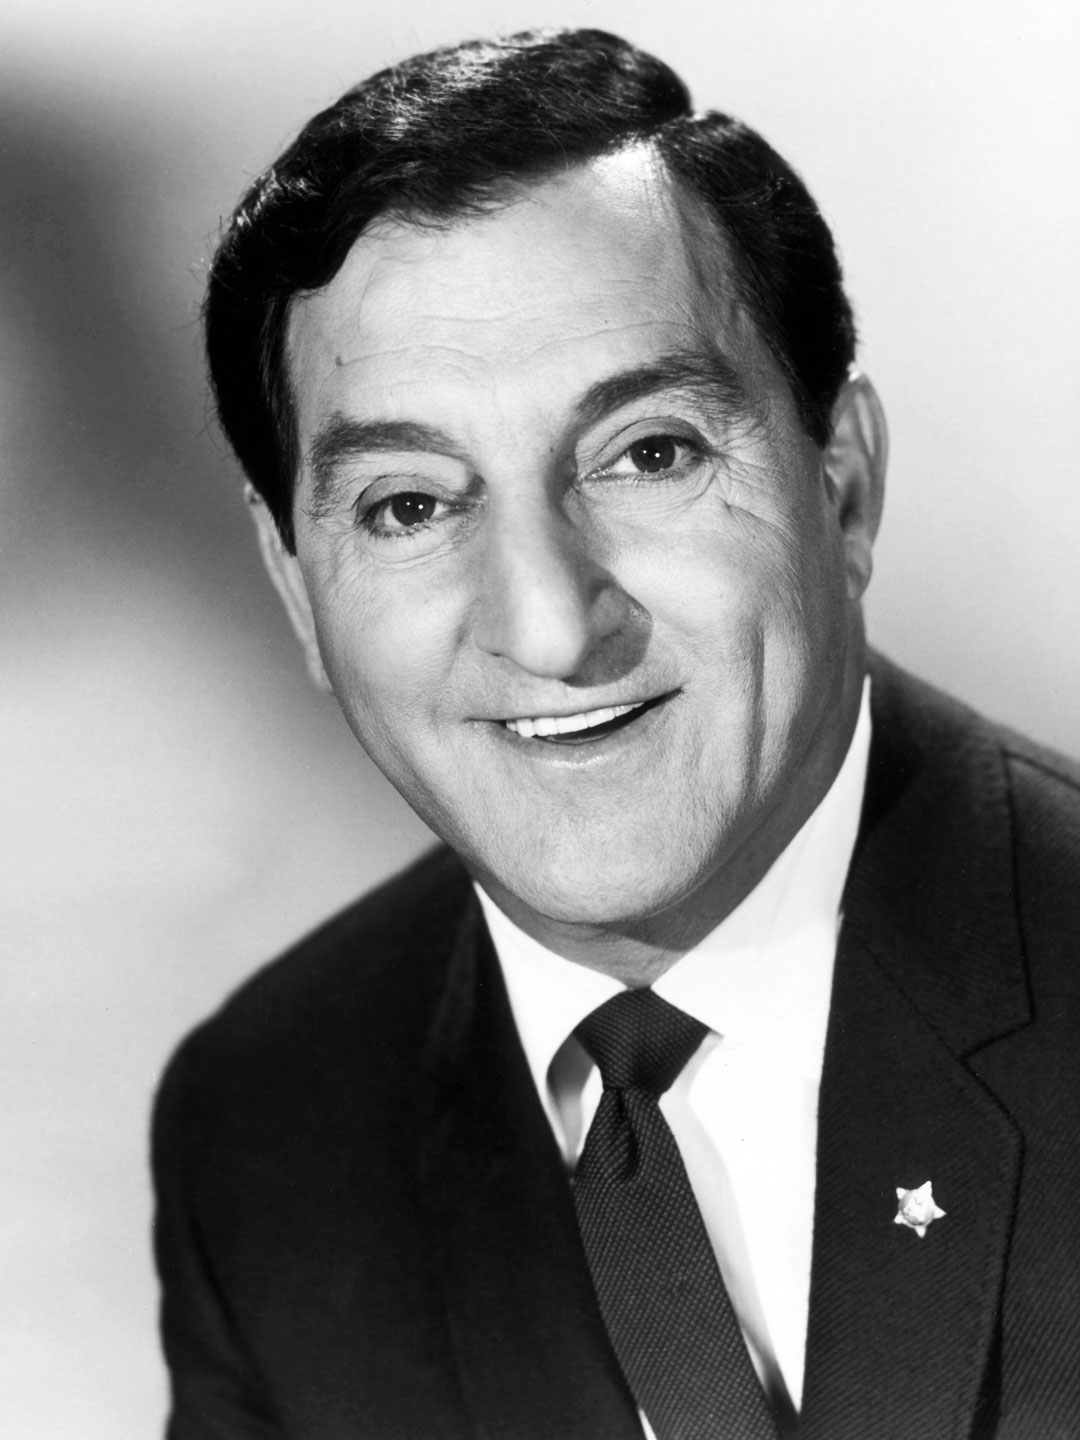 How tall is Danny Thomas?